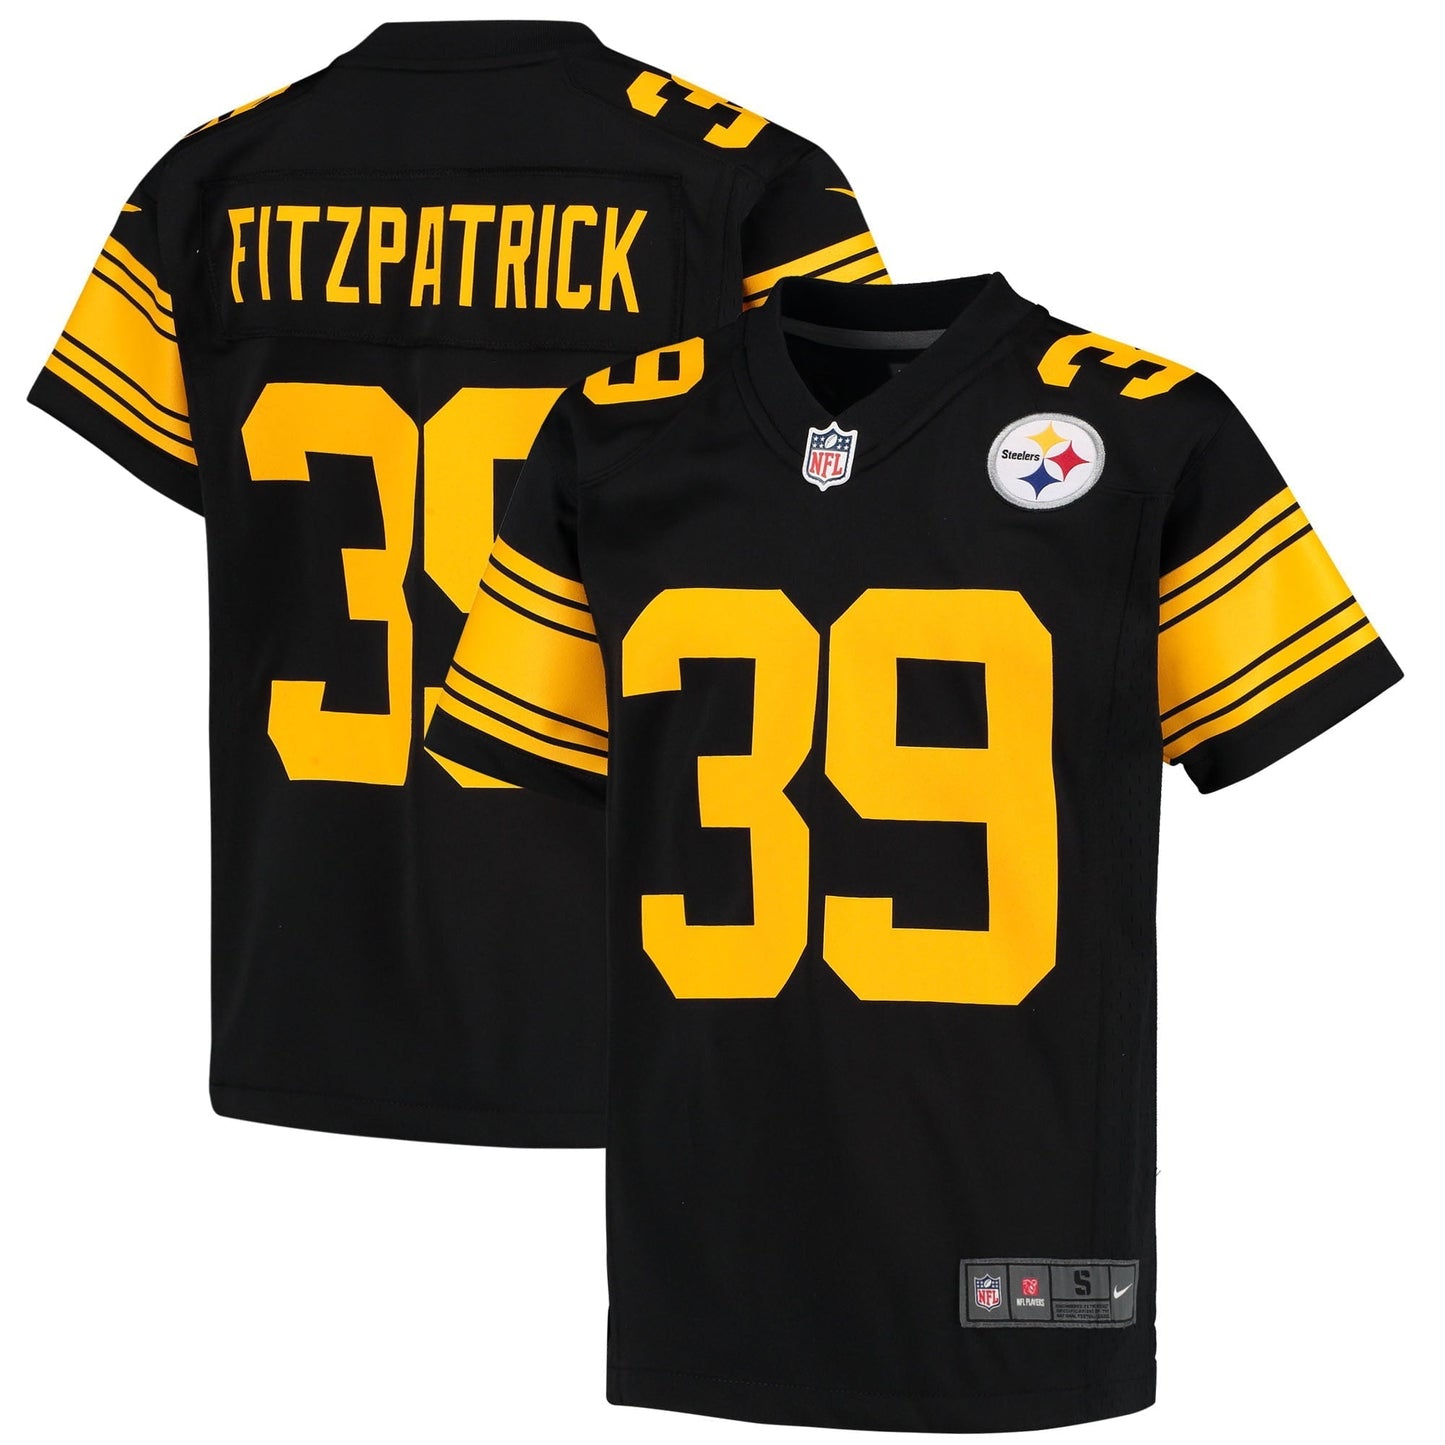 Youth Nike Minkah Fitzpatrick Black Pittsburgh Steelers Game Jersey